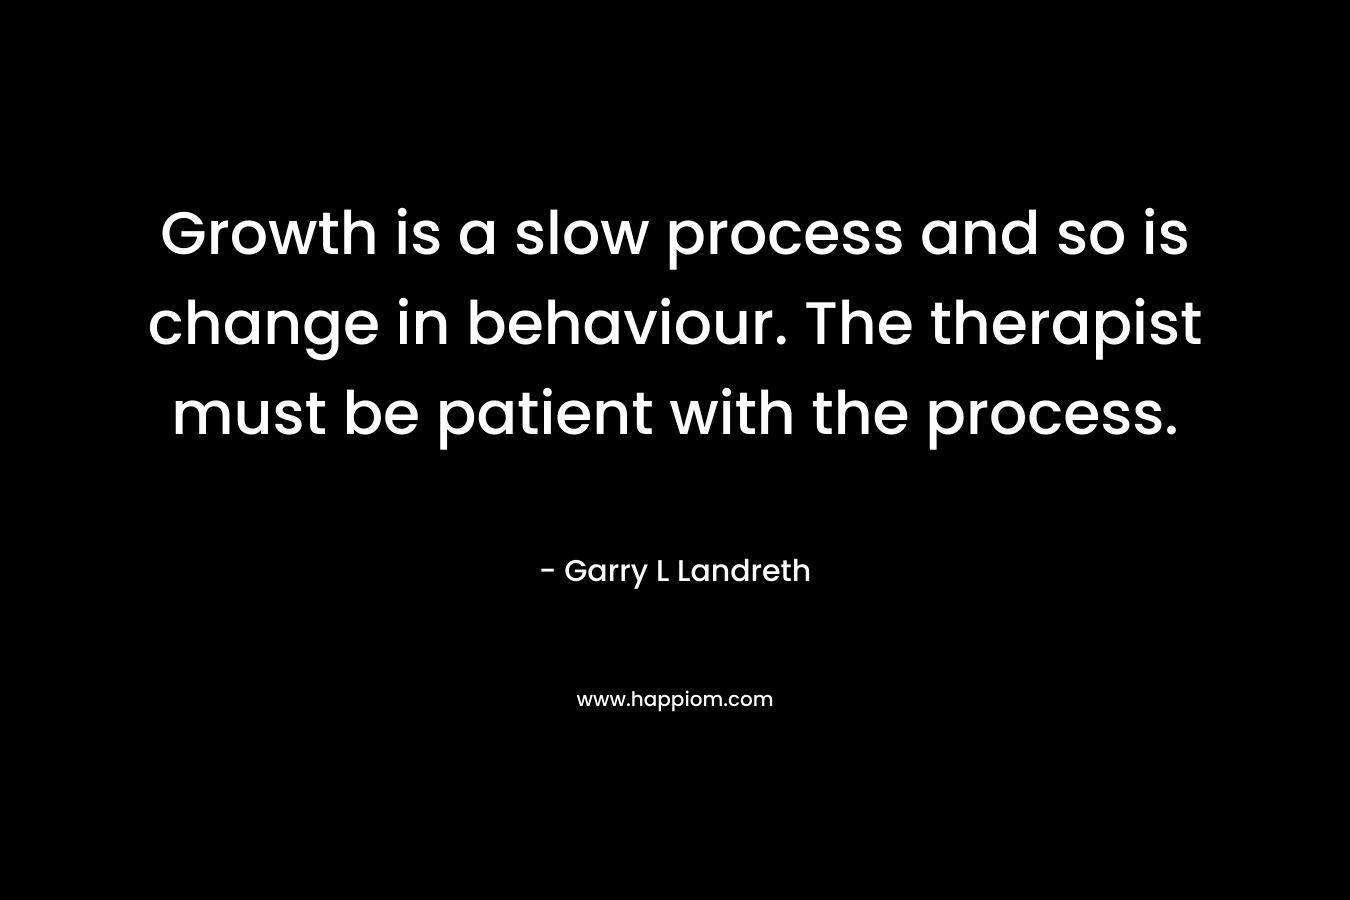 Growth is a slow process and so is change in behaviour. The therapist must be patient with the process.